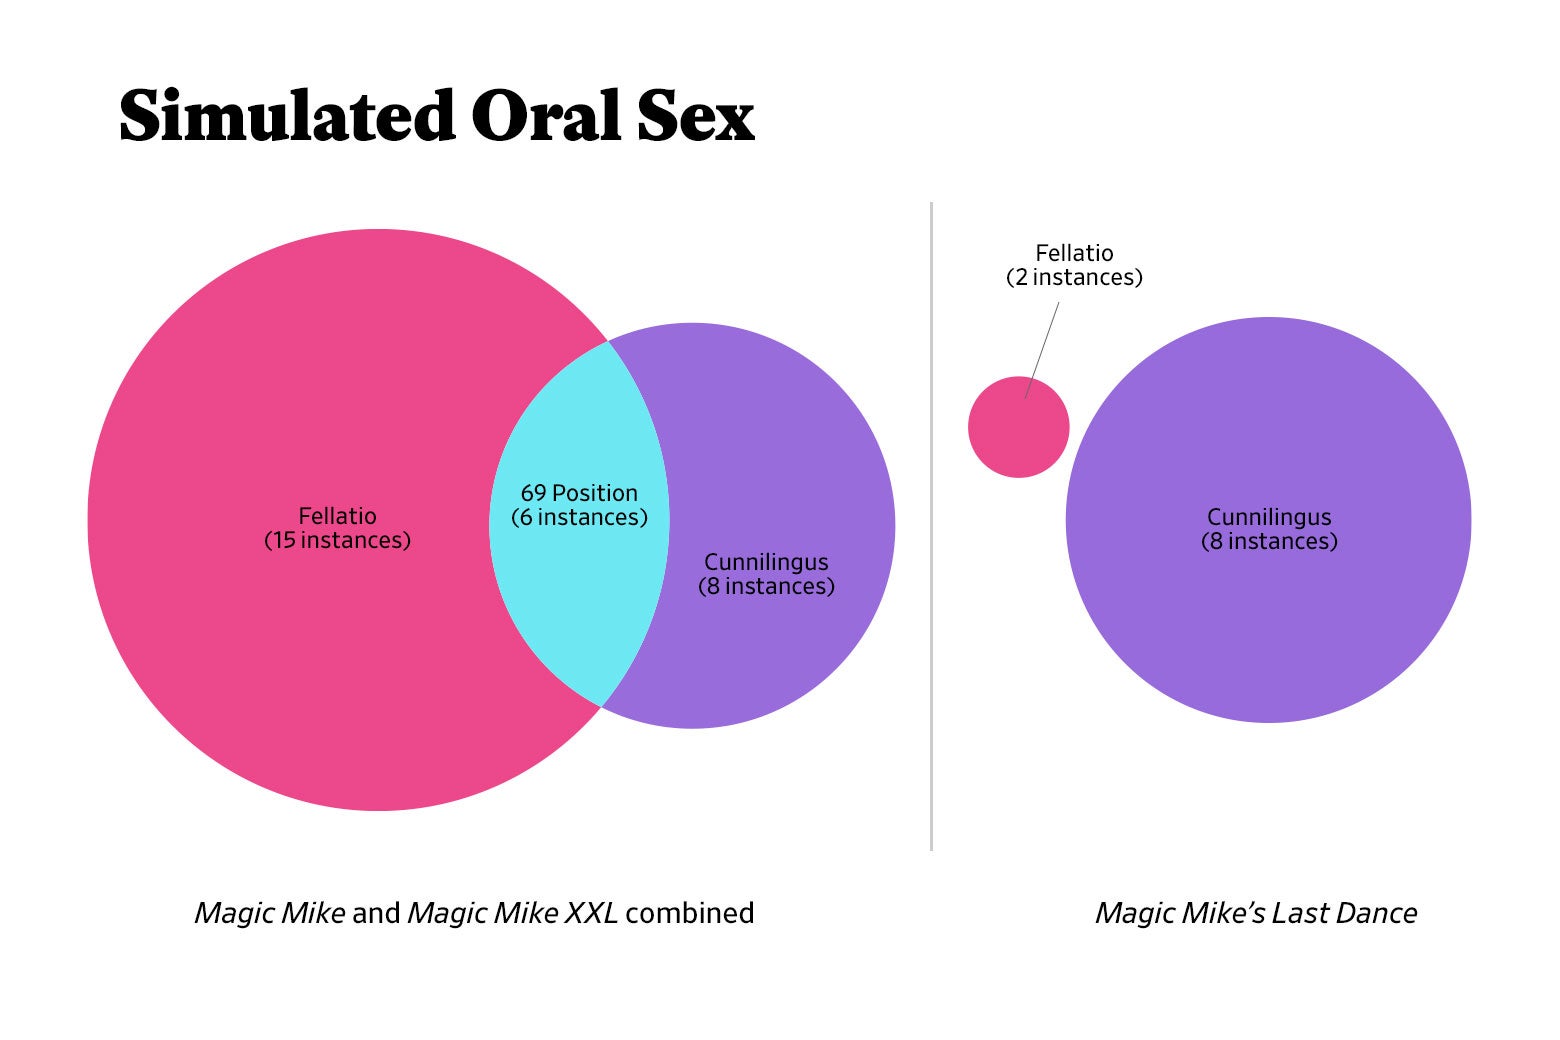 Two Venn diagrams under the heading: Simulated Oral Sex. The first is a Venn diagram of simulated oral sex in Magic Mike and Magic Mike XXL combined. This diagram consists of a large pink circle noting 15 instances of Fellatio, and a smaller purple circle noting 8 instances of Cunnilingus. They overlap creating a blue section, that notes 6 instances of the 69 Position. The second Venn diagram measures simulated oral sex in Magic Mike’s Last Dance alone. The pink circle is much smaller, measuring 2 instances of fellatio. The purple circle is bigger than this pink circle (but the same size as the purple circle in the previous Venn diagram), also noting 8 instances of Cunnilingus. These two circles do not intersect, noting 0 instances of the 69 Position. 